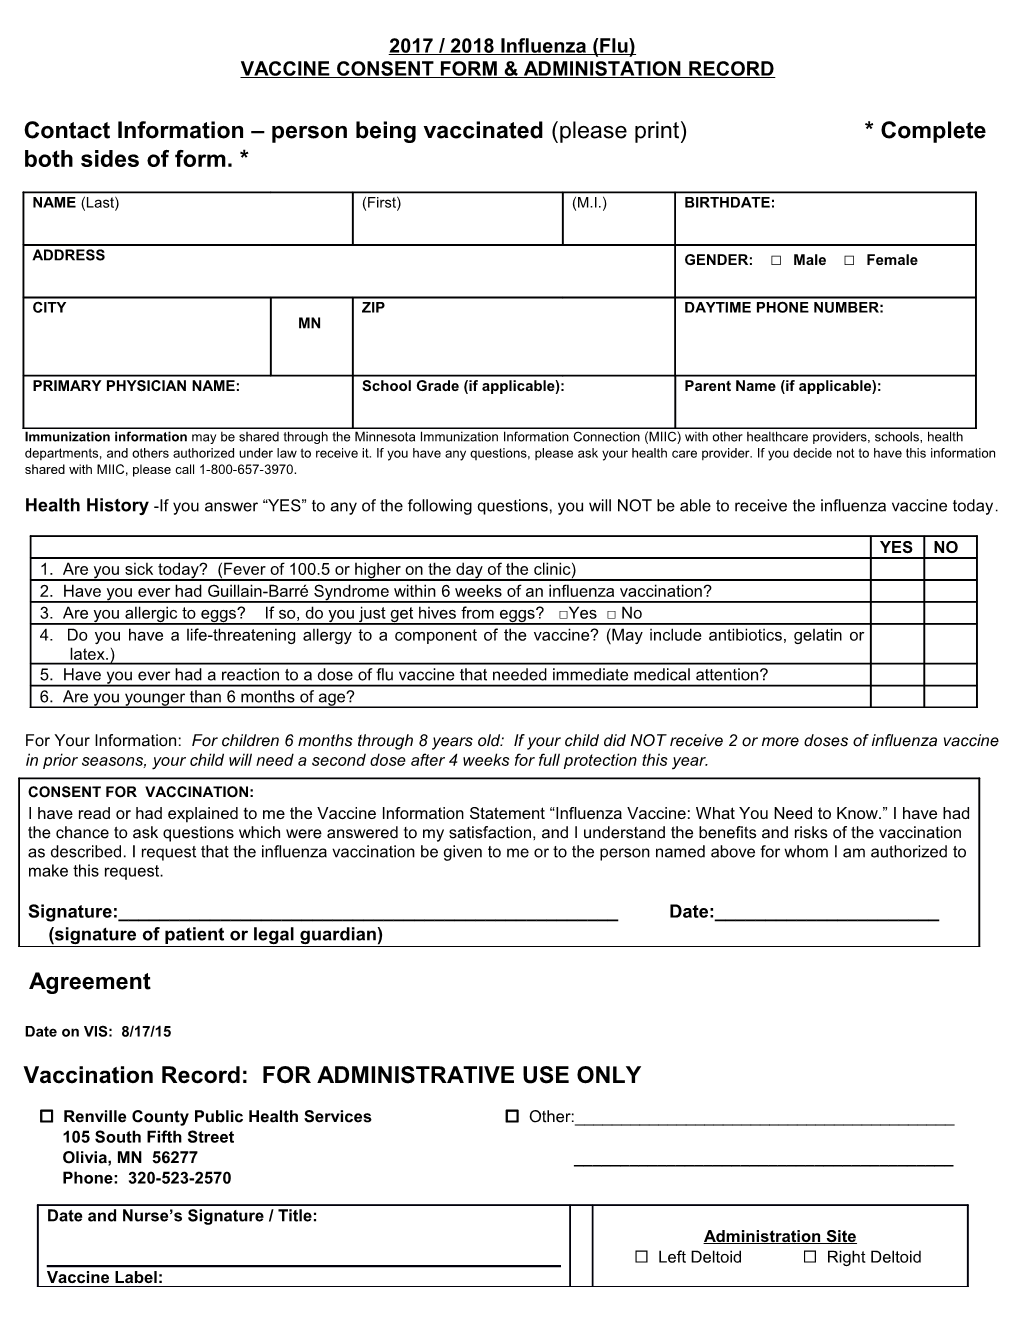 Vaccine Consent Form & Administation Record